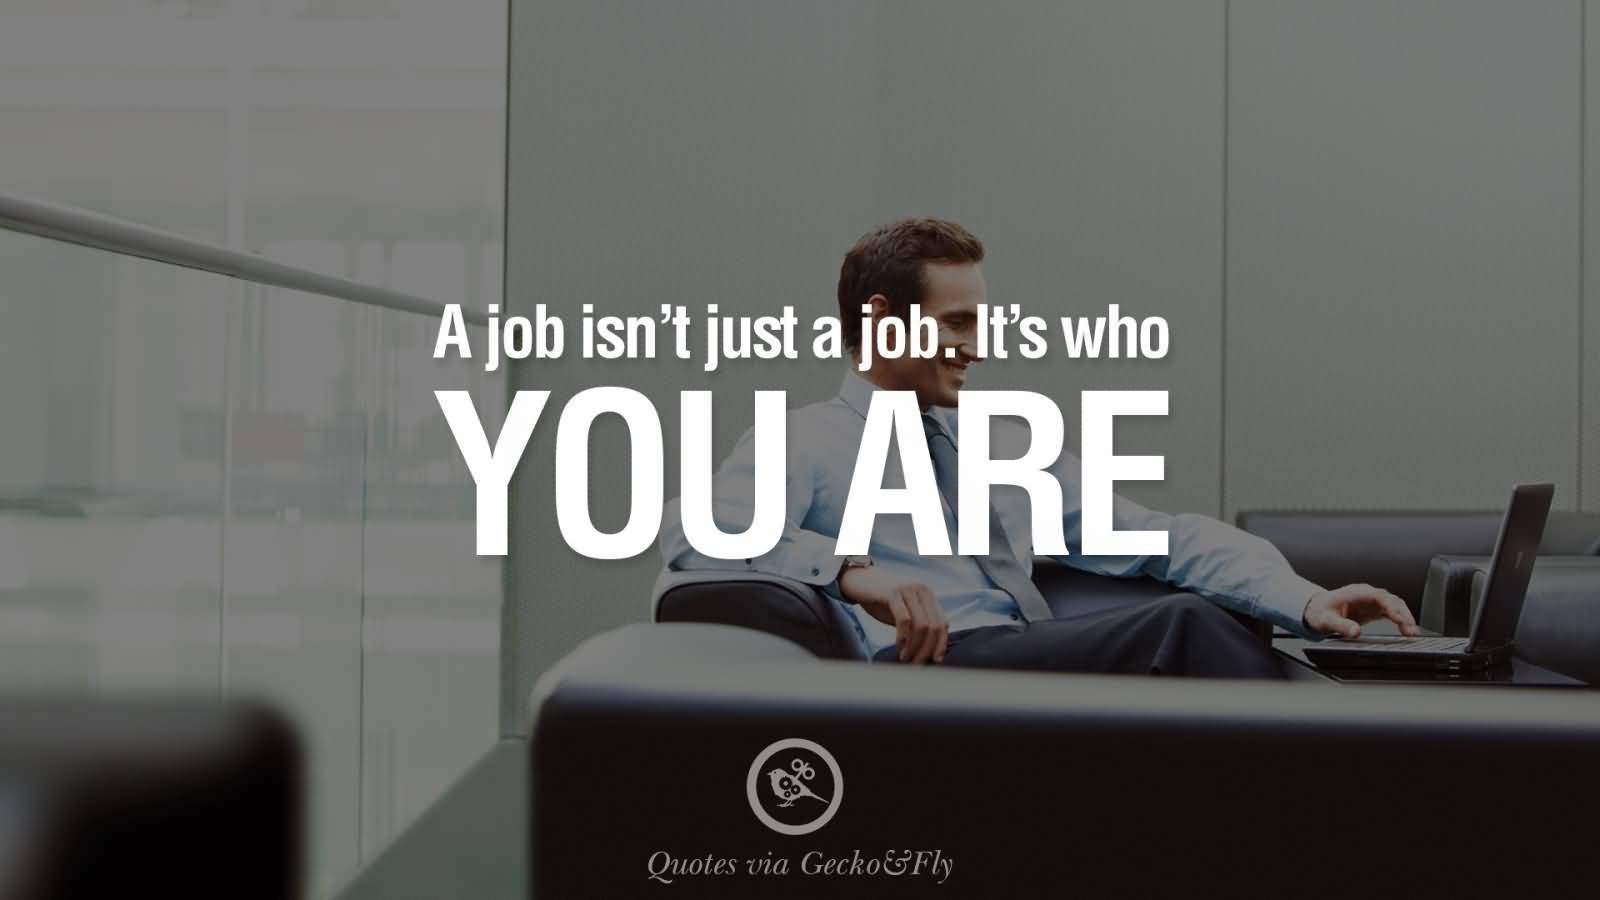 A job isn’t just a job. It’s who you are.